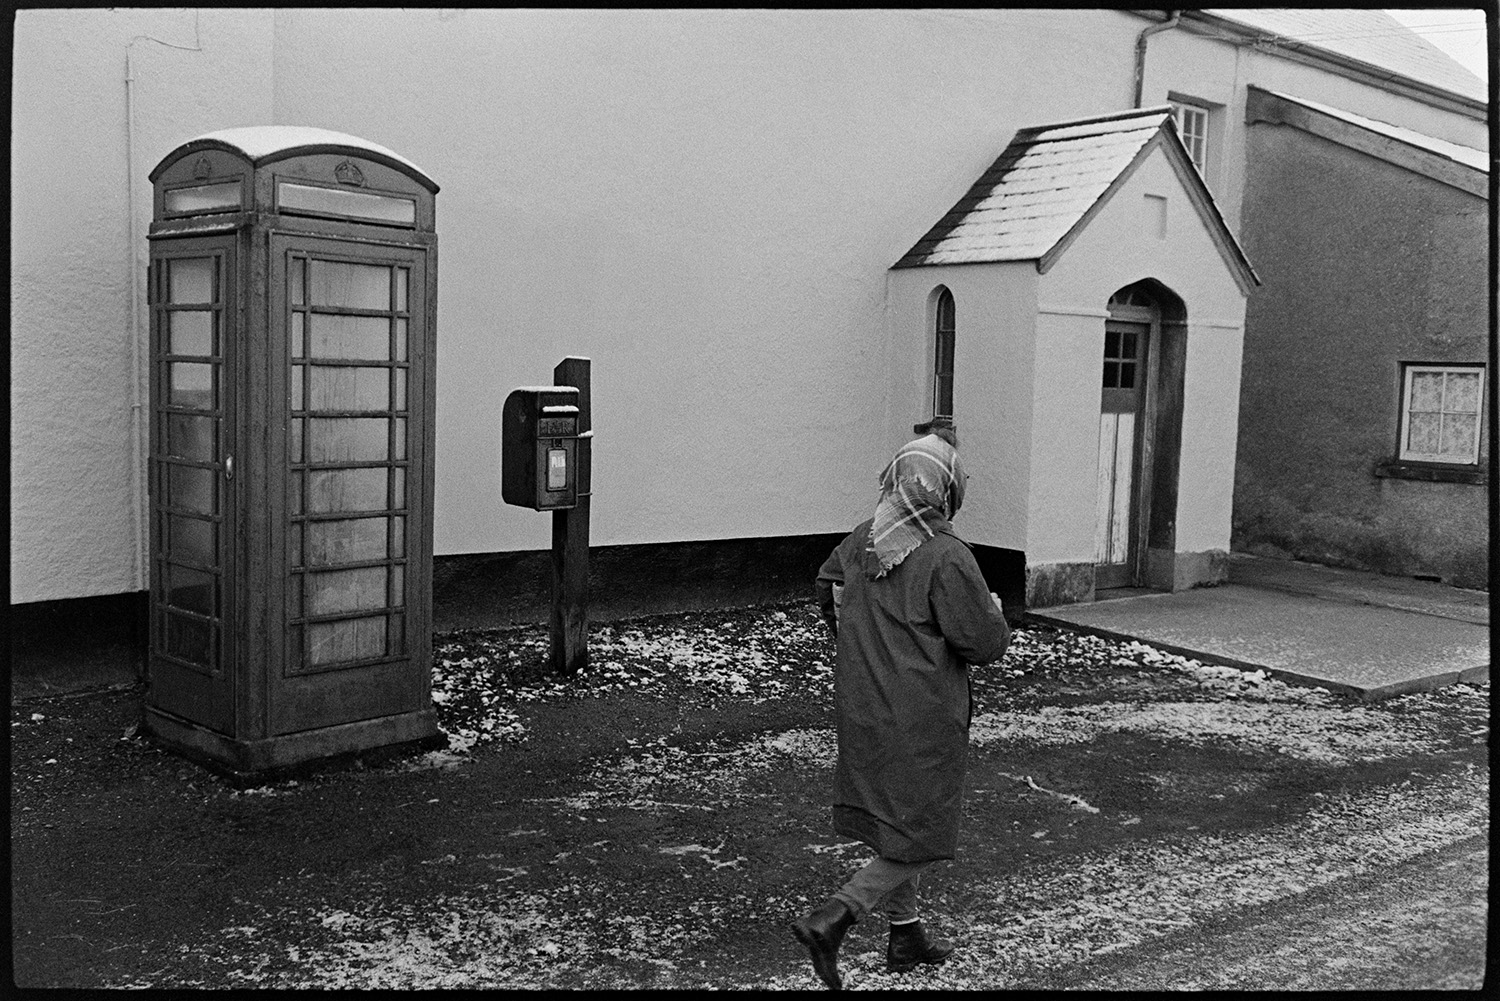 Village street with snow, telephone kiosk and letter box.
[A woman walking along an icy road past a telephone box and post box in Riddlecombe.]